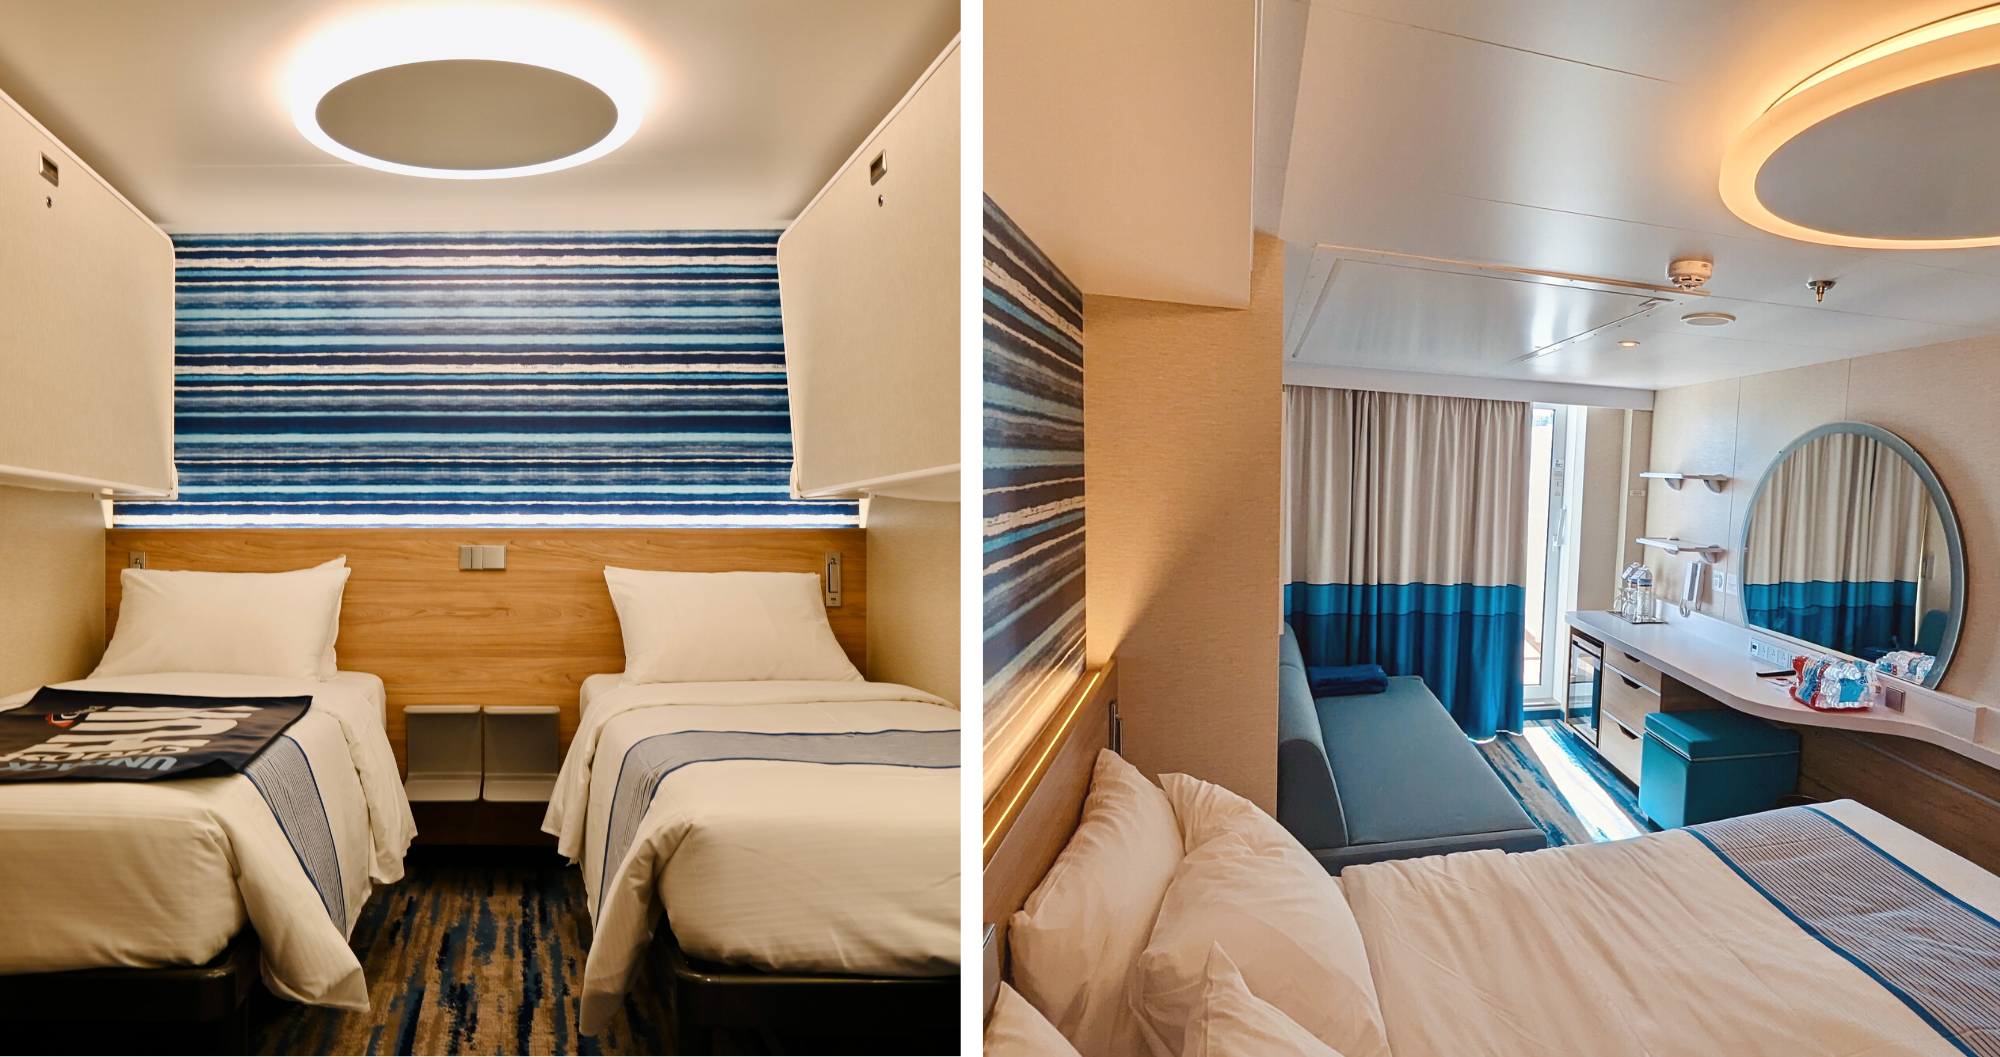 Cruise Line Rooms Compared: Royal Caribbean, Norwegian, Carnival